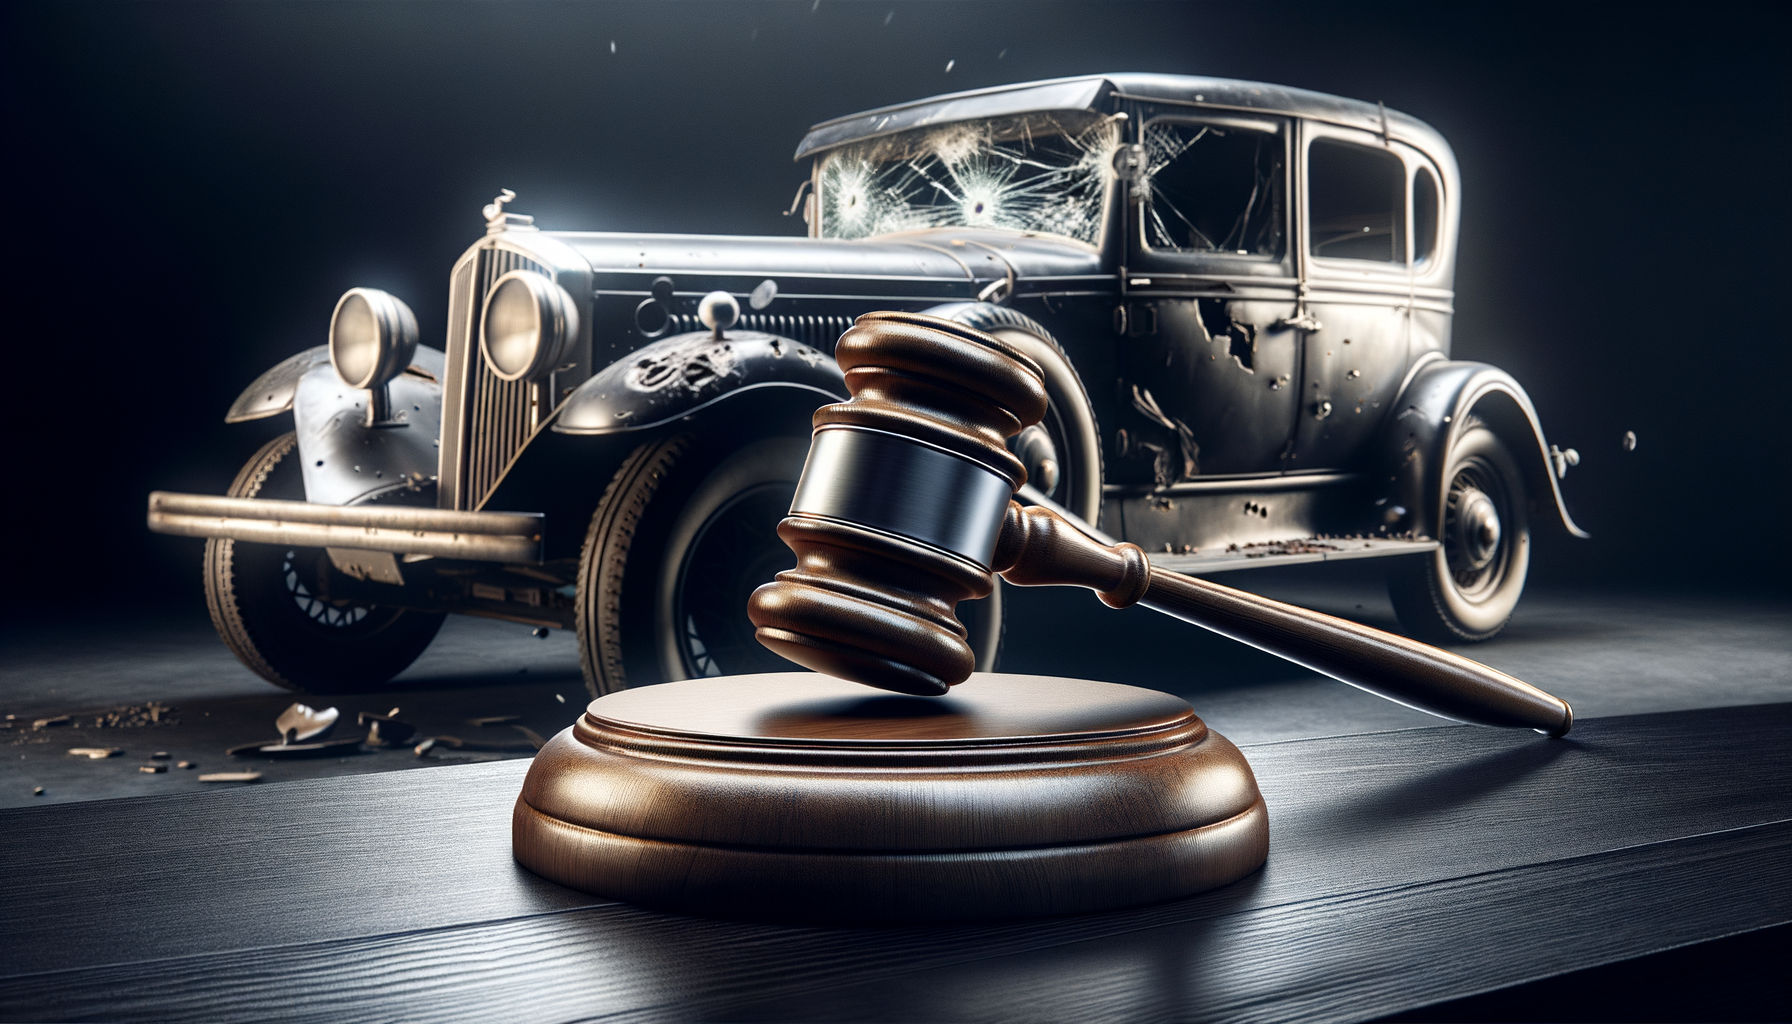 Auction hammer with a damaged vintage car